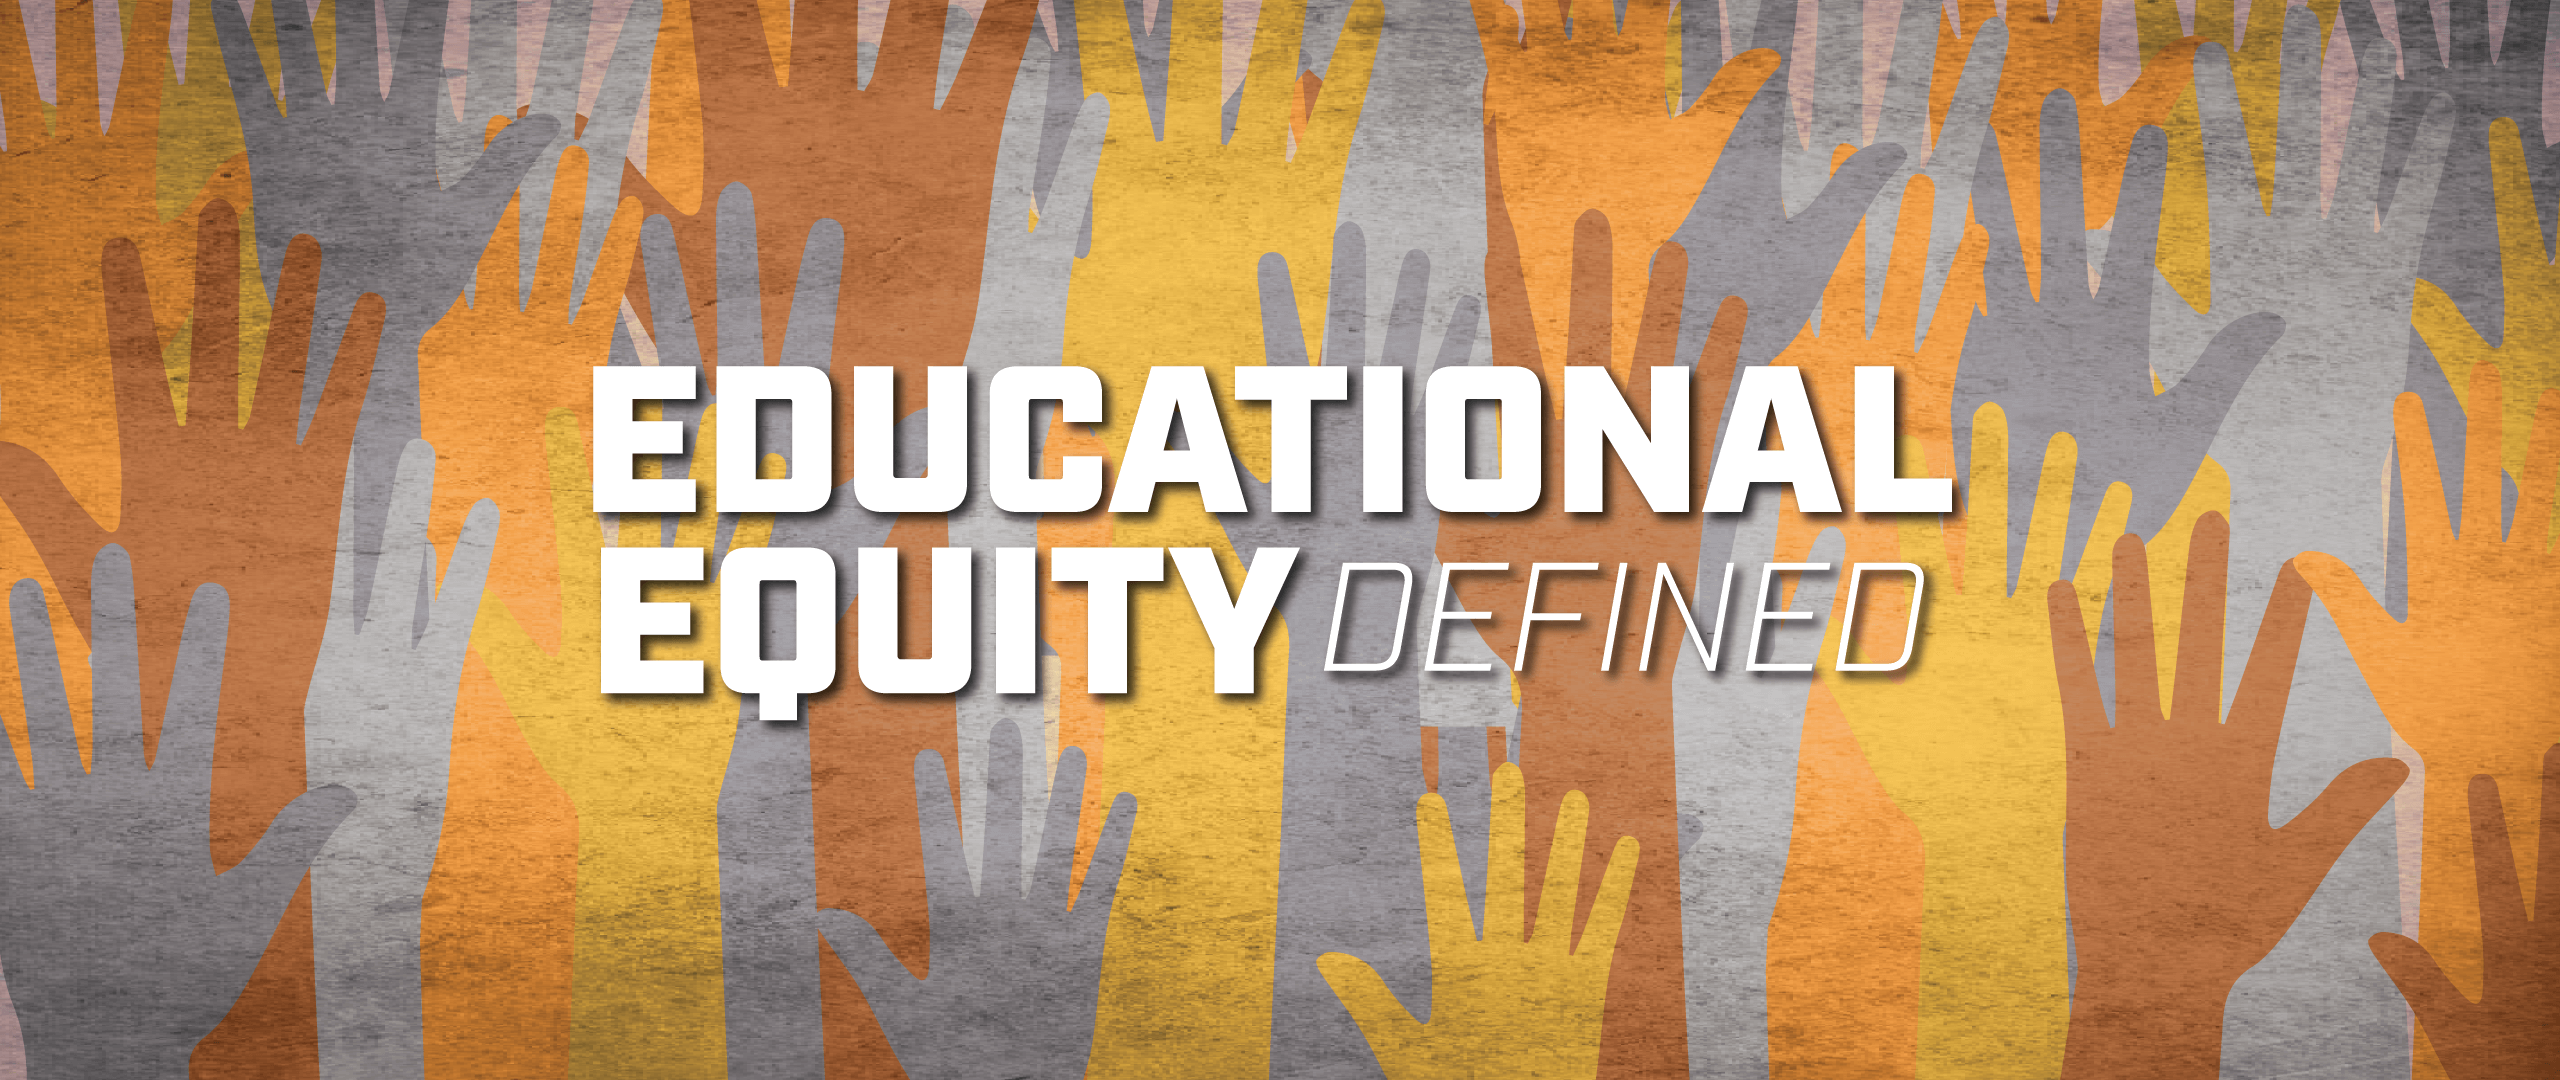 Educational Equity Definition Adopted